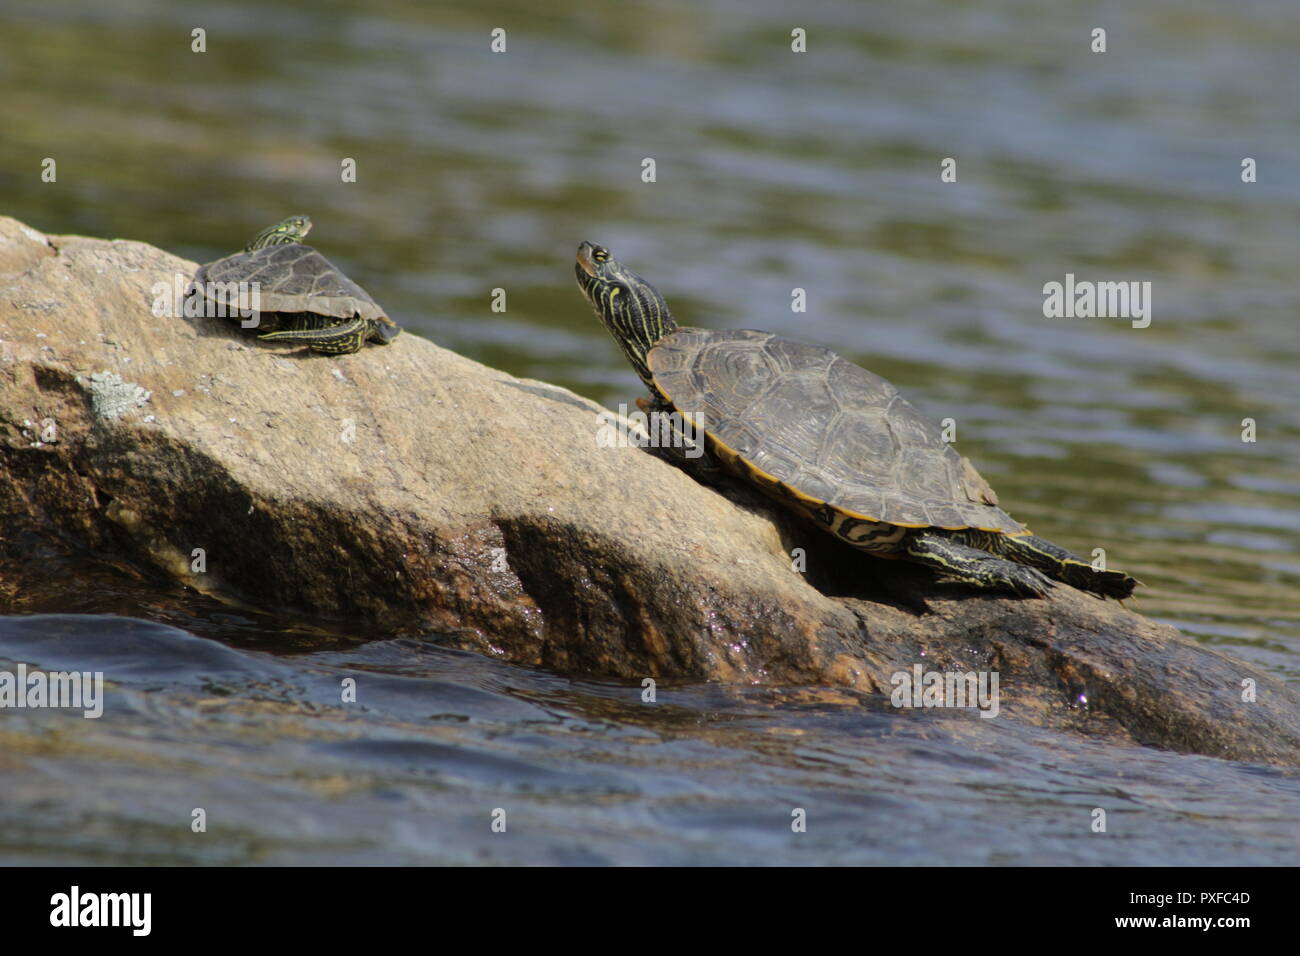 Northern Map turtle (Graptemys geographica) basking in Ontario Stock Photo